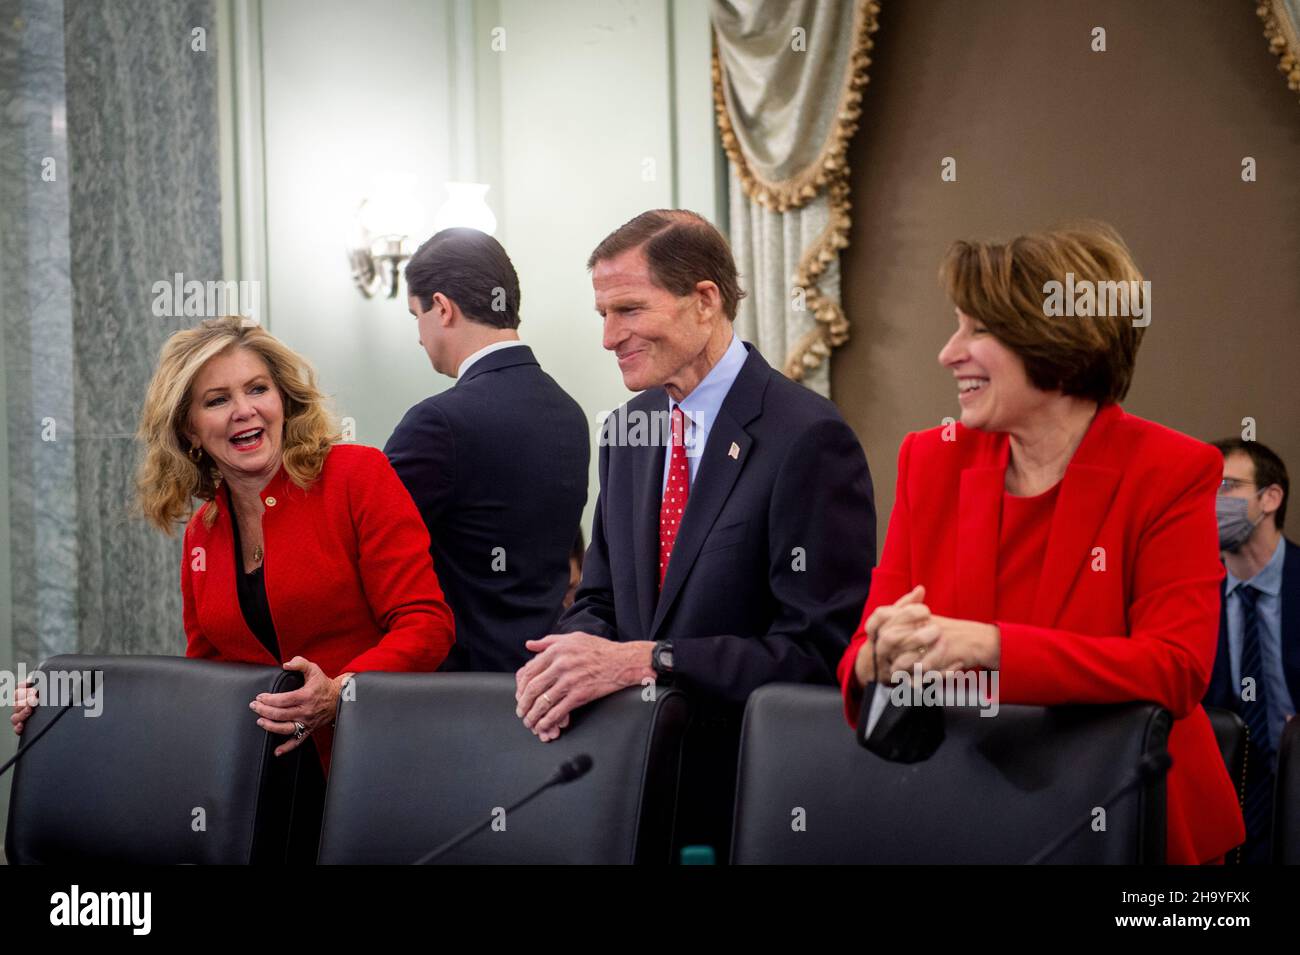 Prior to the testimony of Adam Mosseri, Head of Instagram, United States Senator Marsha Blackburn (Republican of Tennessee), left, United States Senator Richard Blumenthal (Democrat of Connecticut), center, and United States Senator Amy Klobuchar (Democrat of Minnesota), right, arrive at a Senate Committee on Commerce, Science, and Transportation - Subcommittee on Consumer Protection, Product Safety, and Data Security hearing to examine protecting kids online, focusing on Instagram and reforms for young users, in the Russell Senate Office Building in Washington, DC, Wednesday, December 8, 2021 Stock Photo